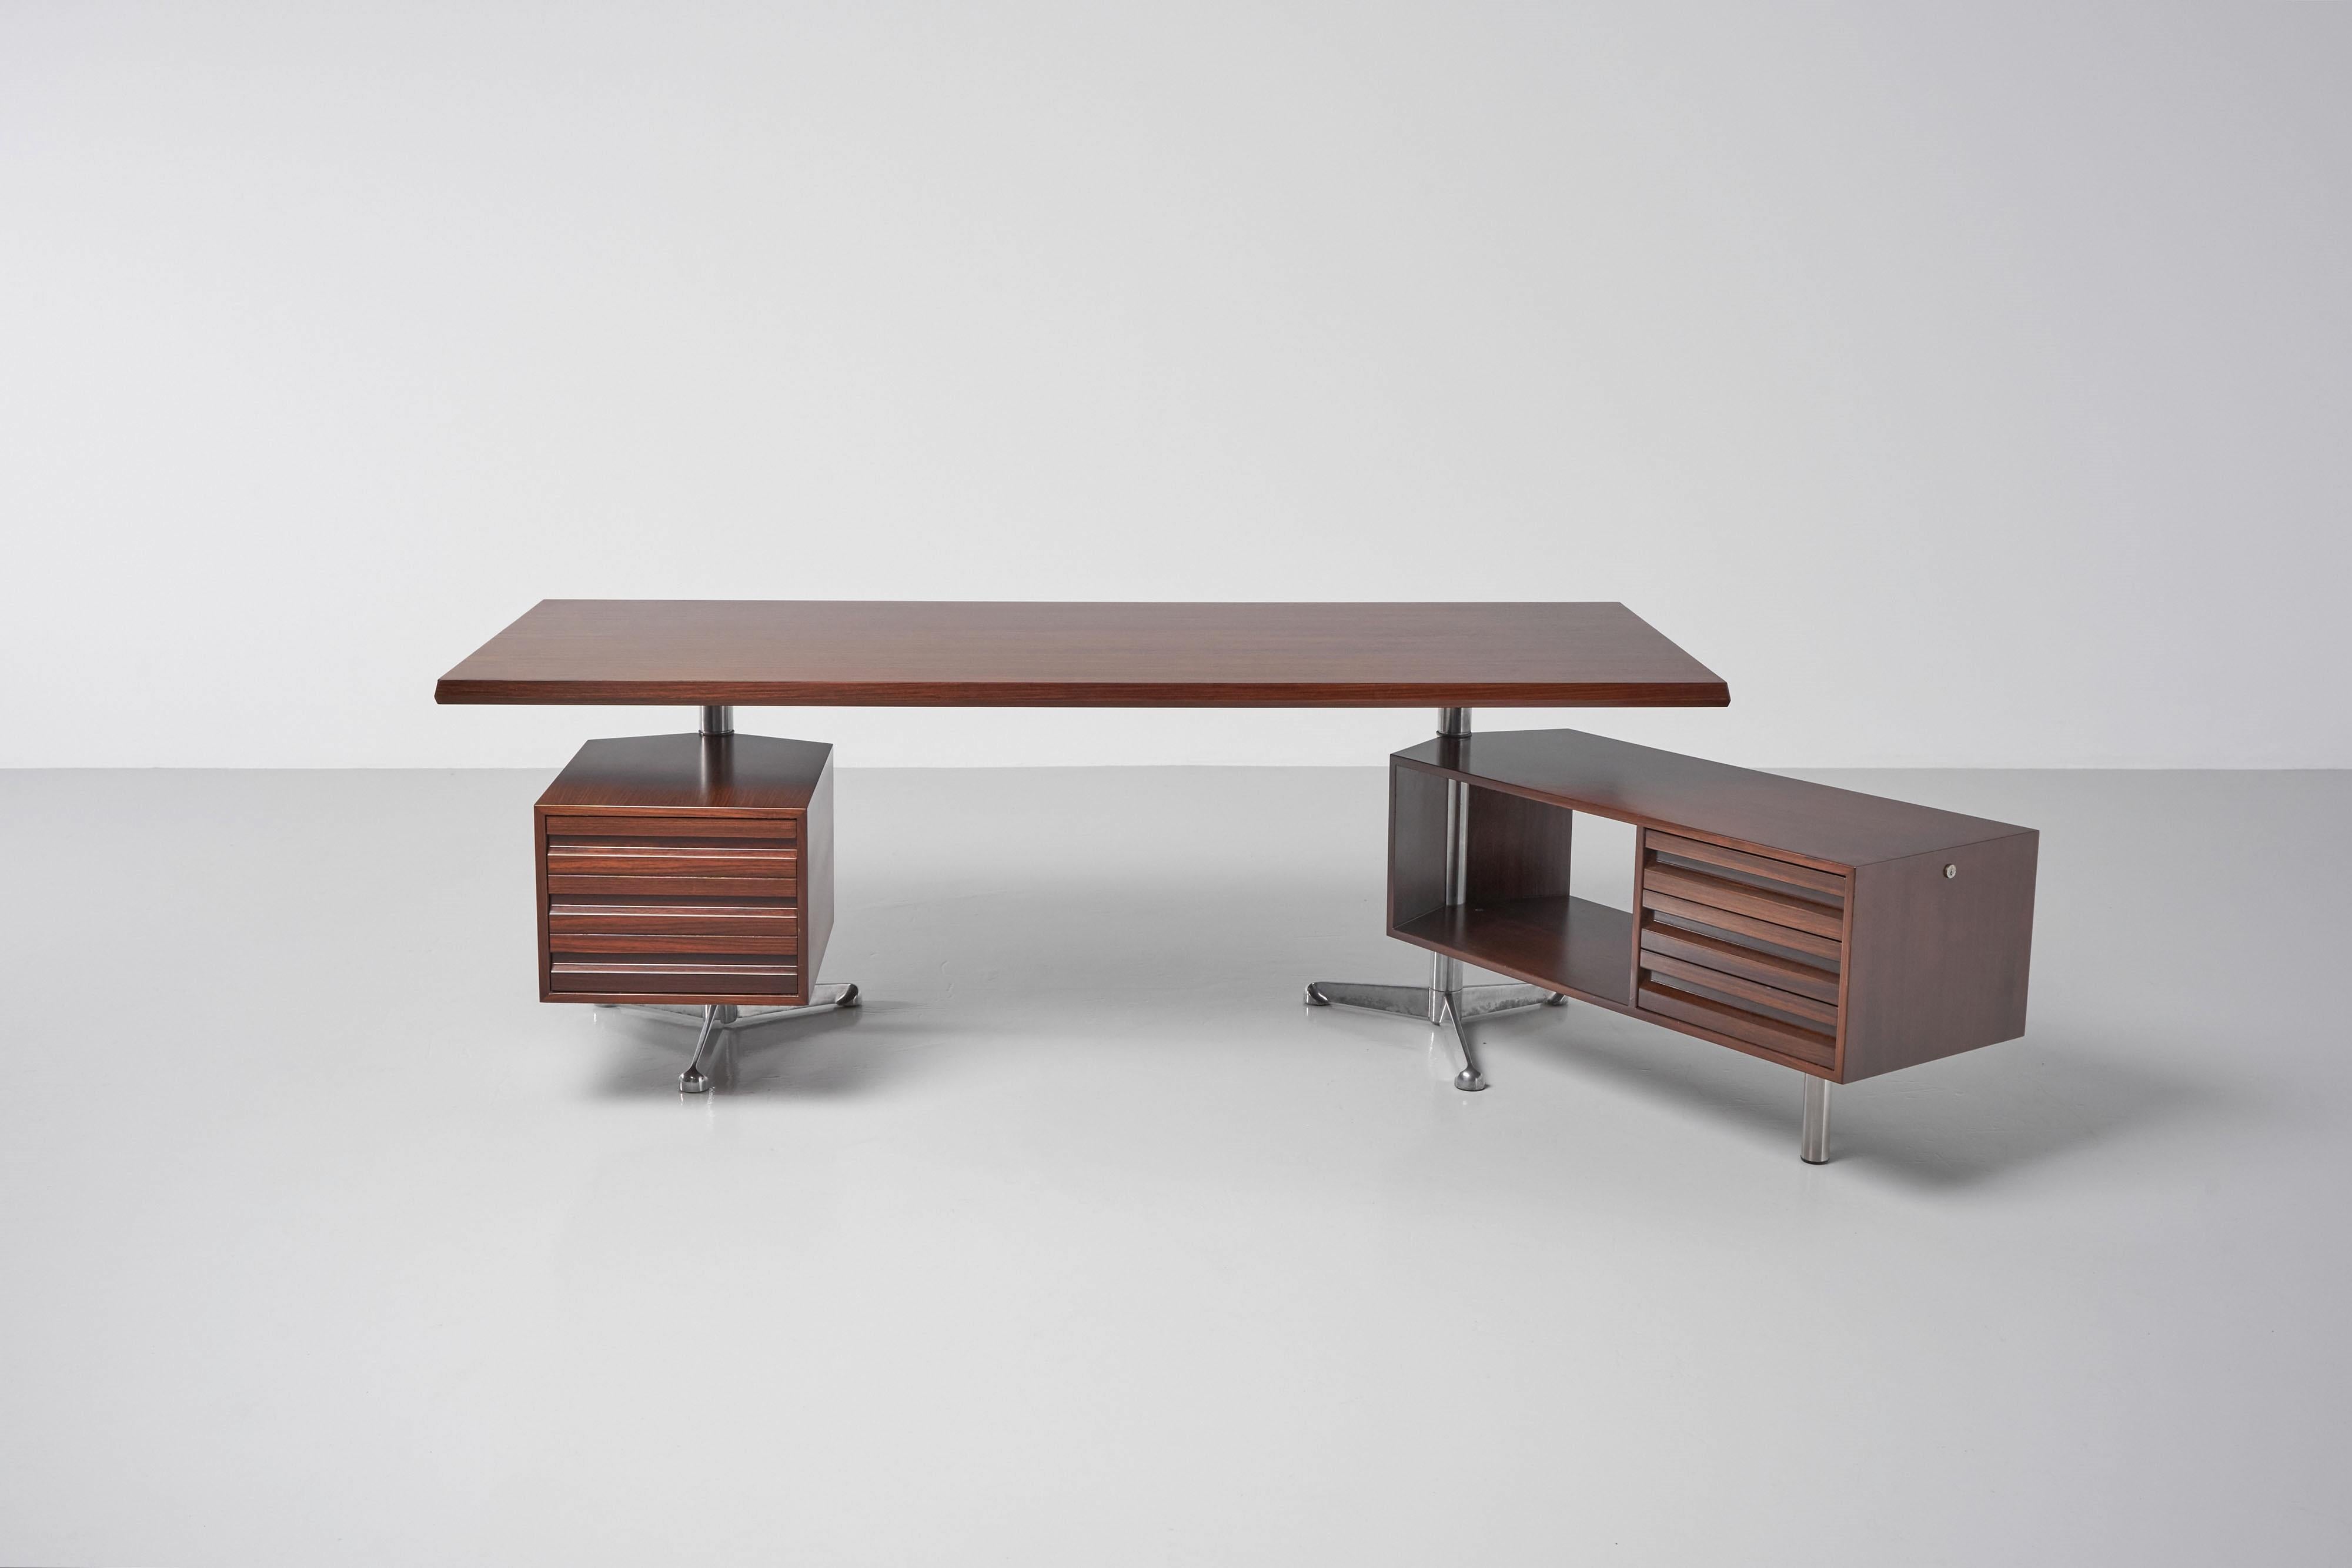 Fantastic model T95 office desk designed by Osvaldo Borsani and manufactured by Tecno, Italy 1956. The desk has metal and aluminium legs and rosewood veneer top and compartments. The rosewood shows a beautiful grain and deep warm colour. This nice